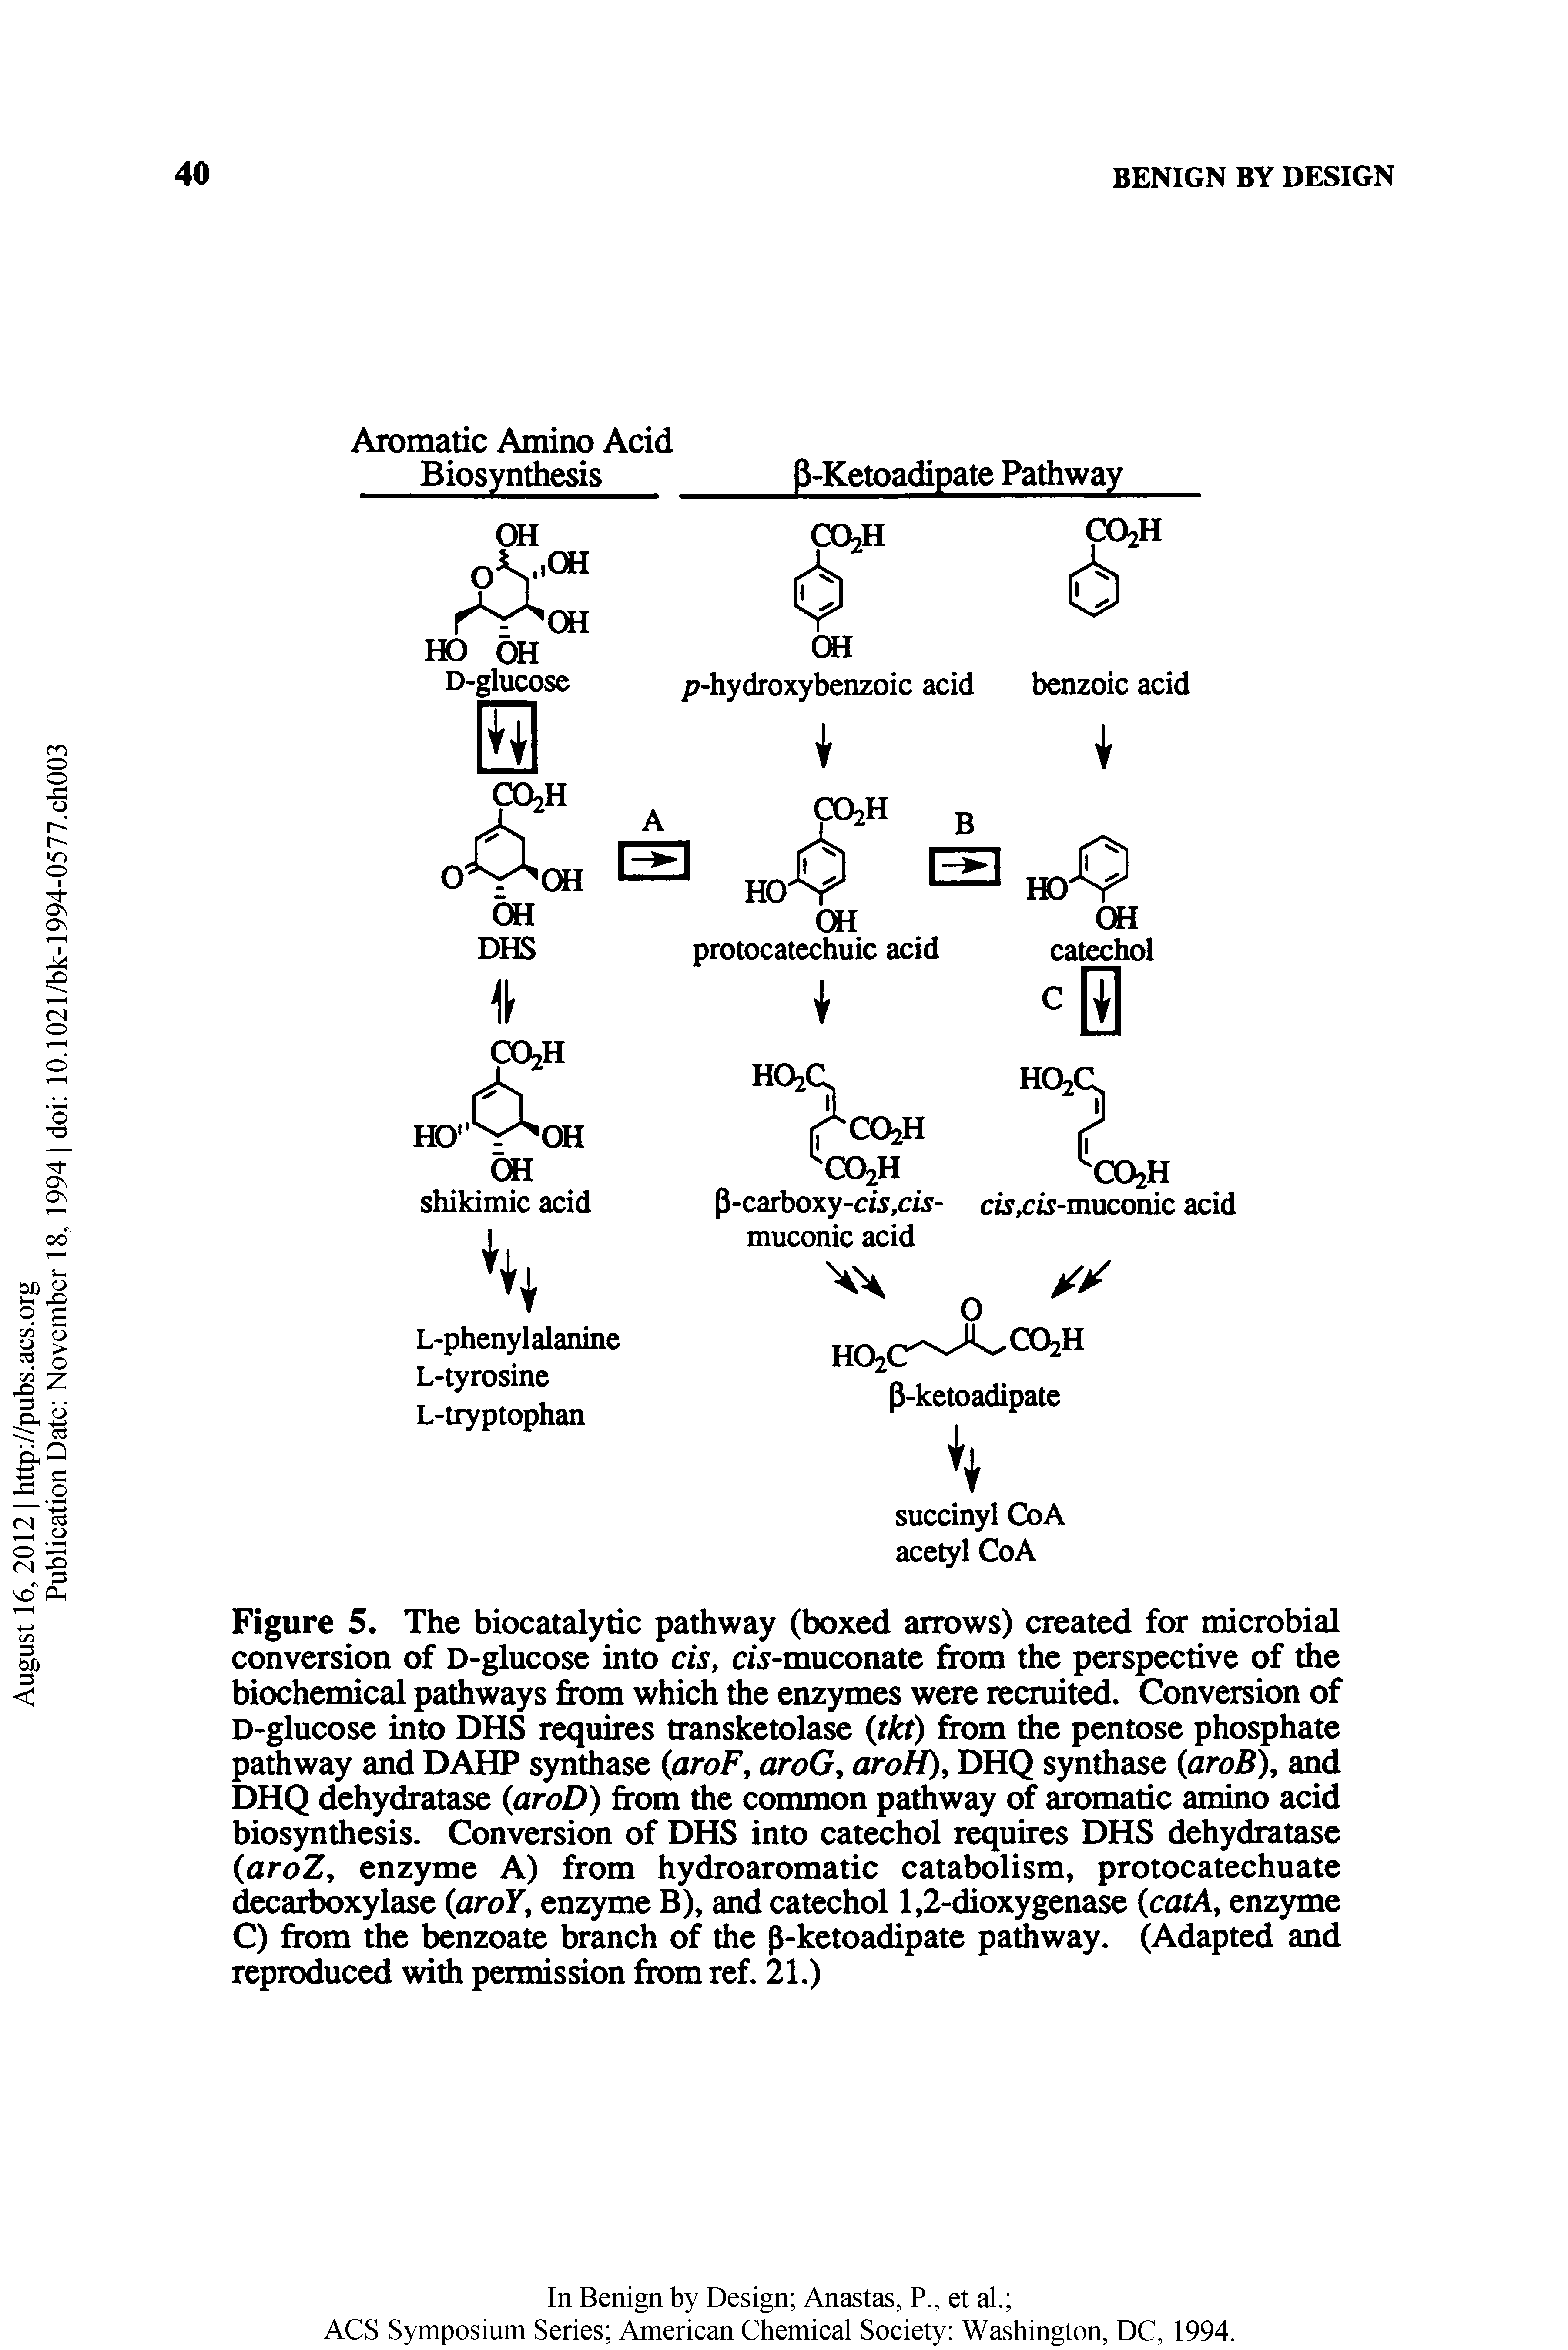 Figure 5. The biocatalytic pathway (boxed arrows) created for microbial conversion of D-glucose into cis, cw-muconate from the perspective of the biochemical pathways from which the enzymes were recruited. Conversion of D-glucose into DHS requires transketolase (tkt) from the pentose phosphate pathway and DAHP synthase (aroF, aroG, aroH)y DHQ synthase aroB and DHQ dehydratase aroD) from the common pathway of aromatic amino acid biosynthesis. Conversion of DHS into catechol requires DHS dehydratase (aroZ, enzyme A) from hydroaromatic catabolism, protocatechuate decarboxylase aroY, enzyme B), and catechol 1,2-dioxygenase (caM, enzyme C) from the benzoate branch of the p-ketoadipate pathway. (Adapted and reproduced with permission from ref. 21.)...